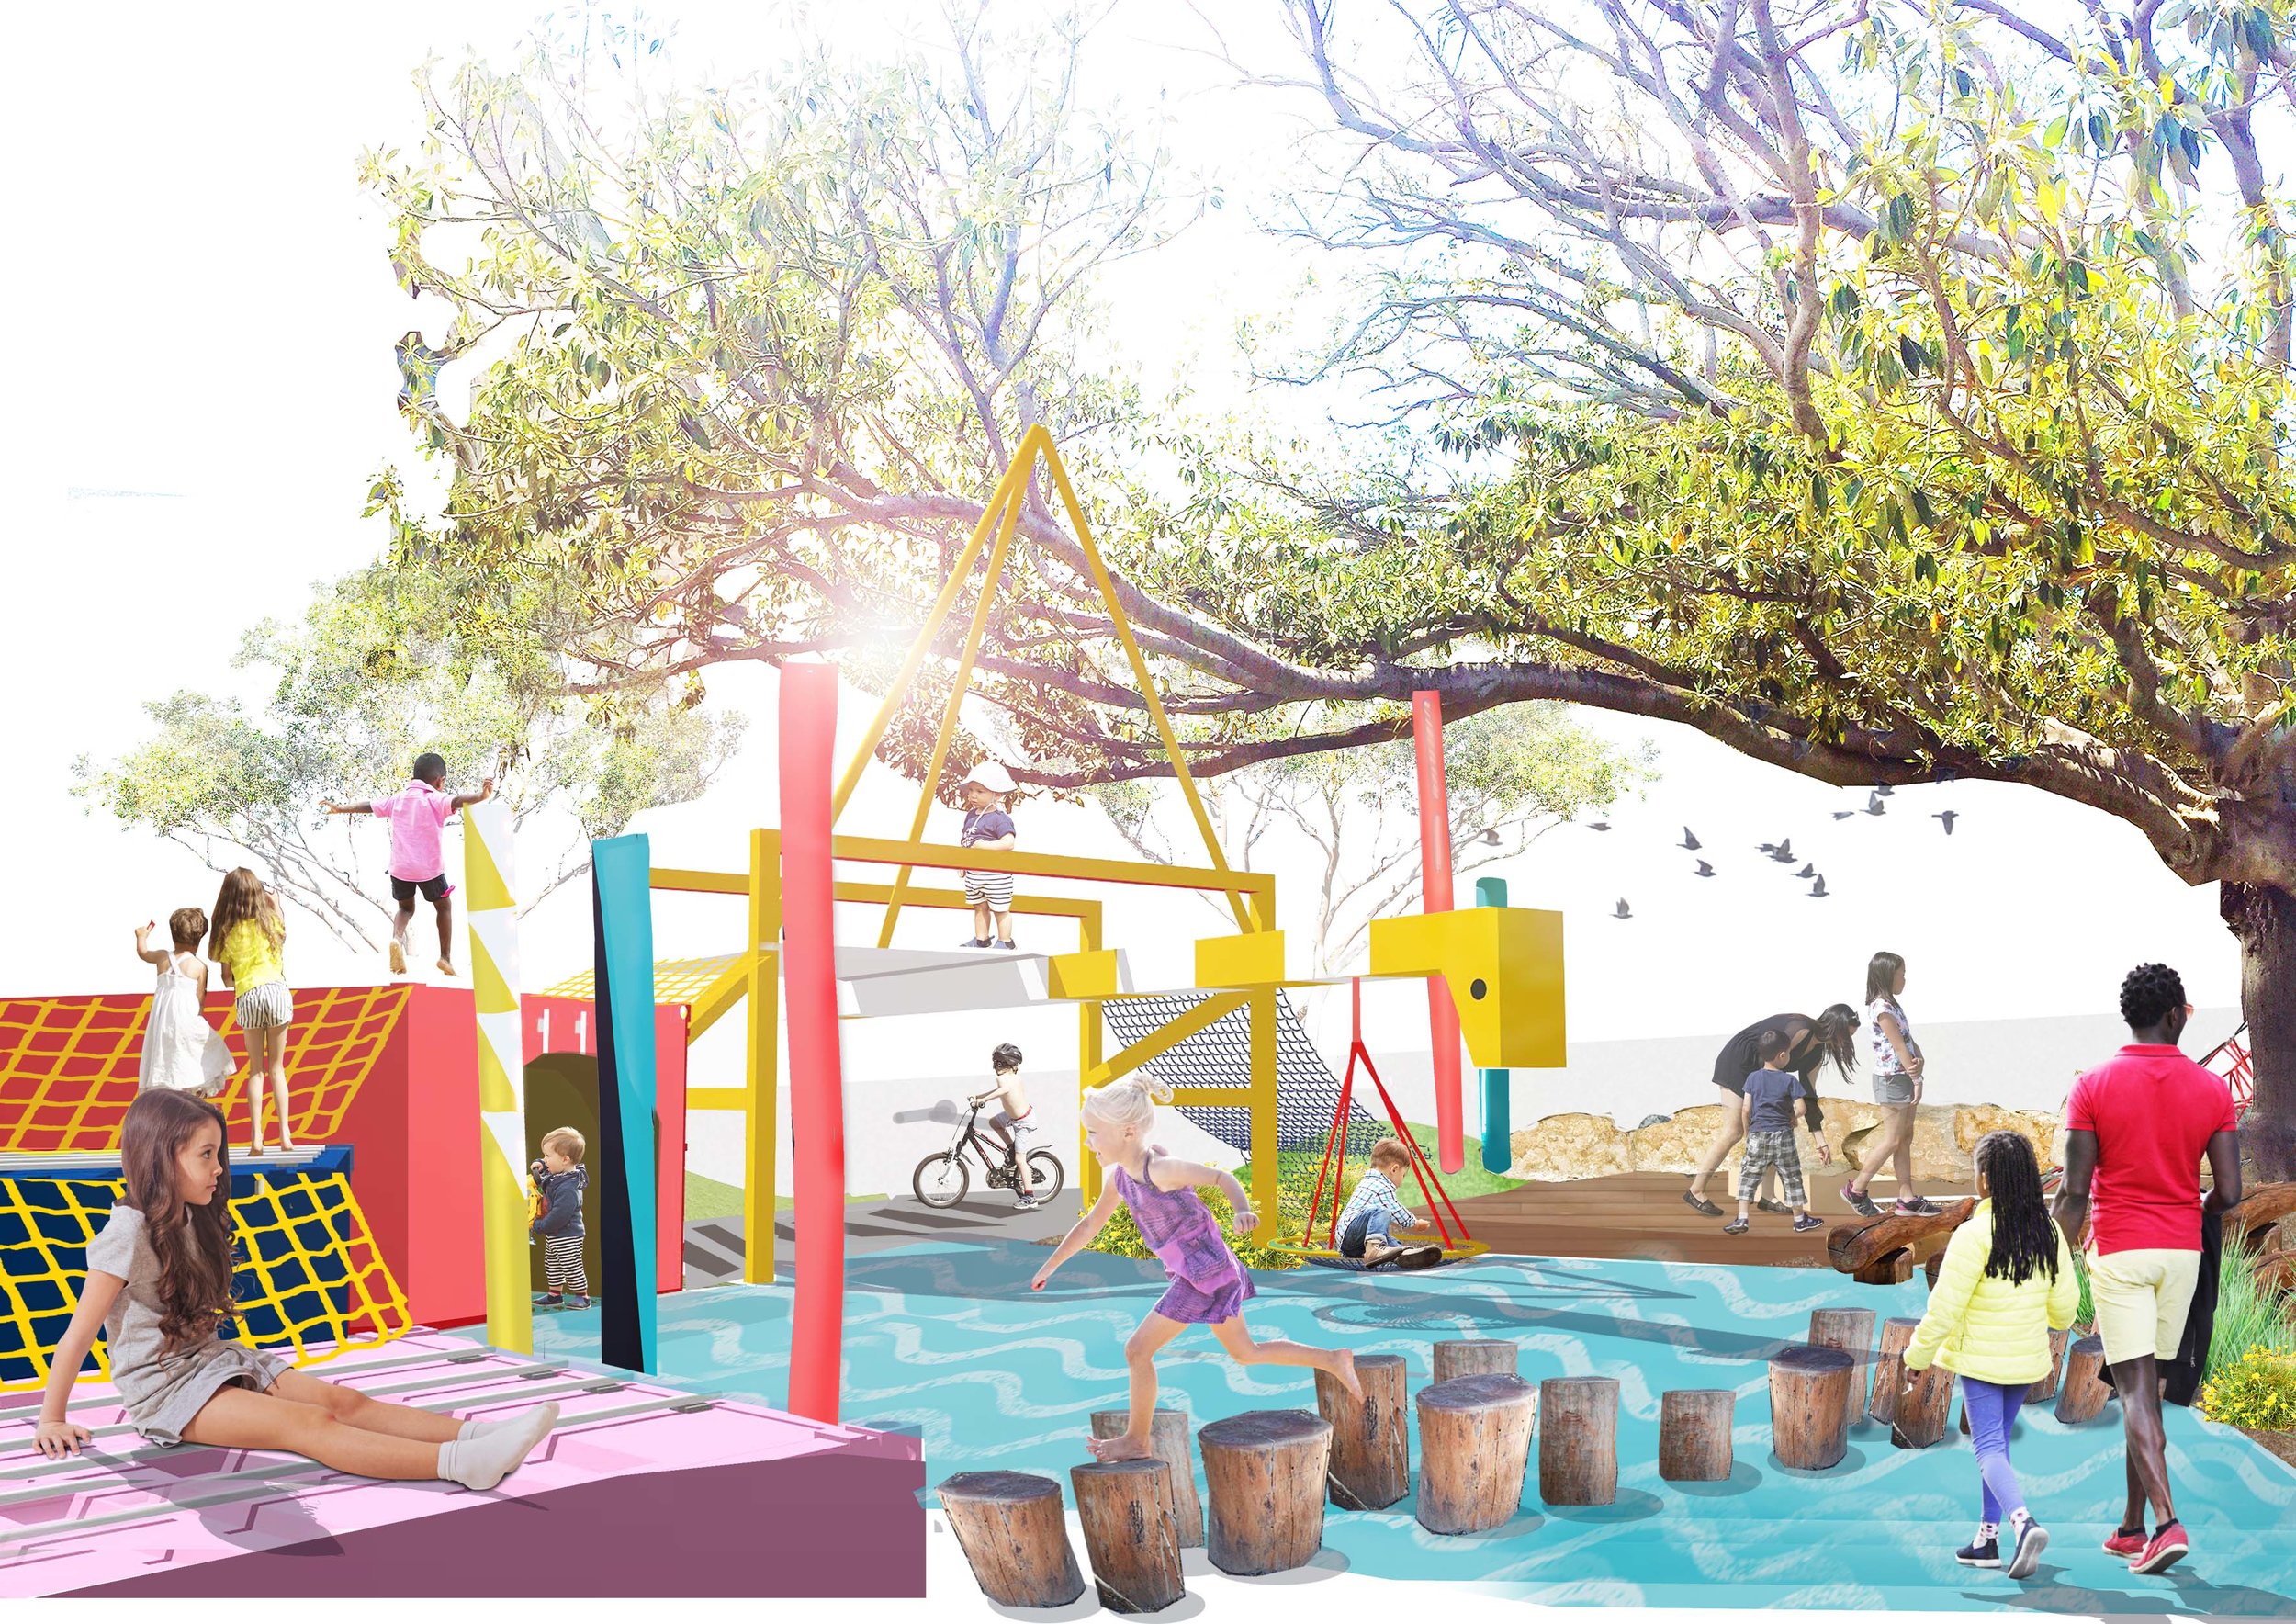 Kings-Square-Urban-Playspace-Perth-Landscape-Architects-Seedesign-Studio